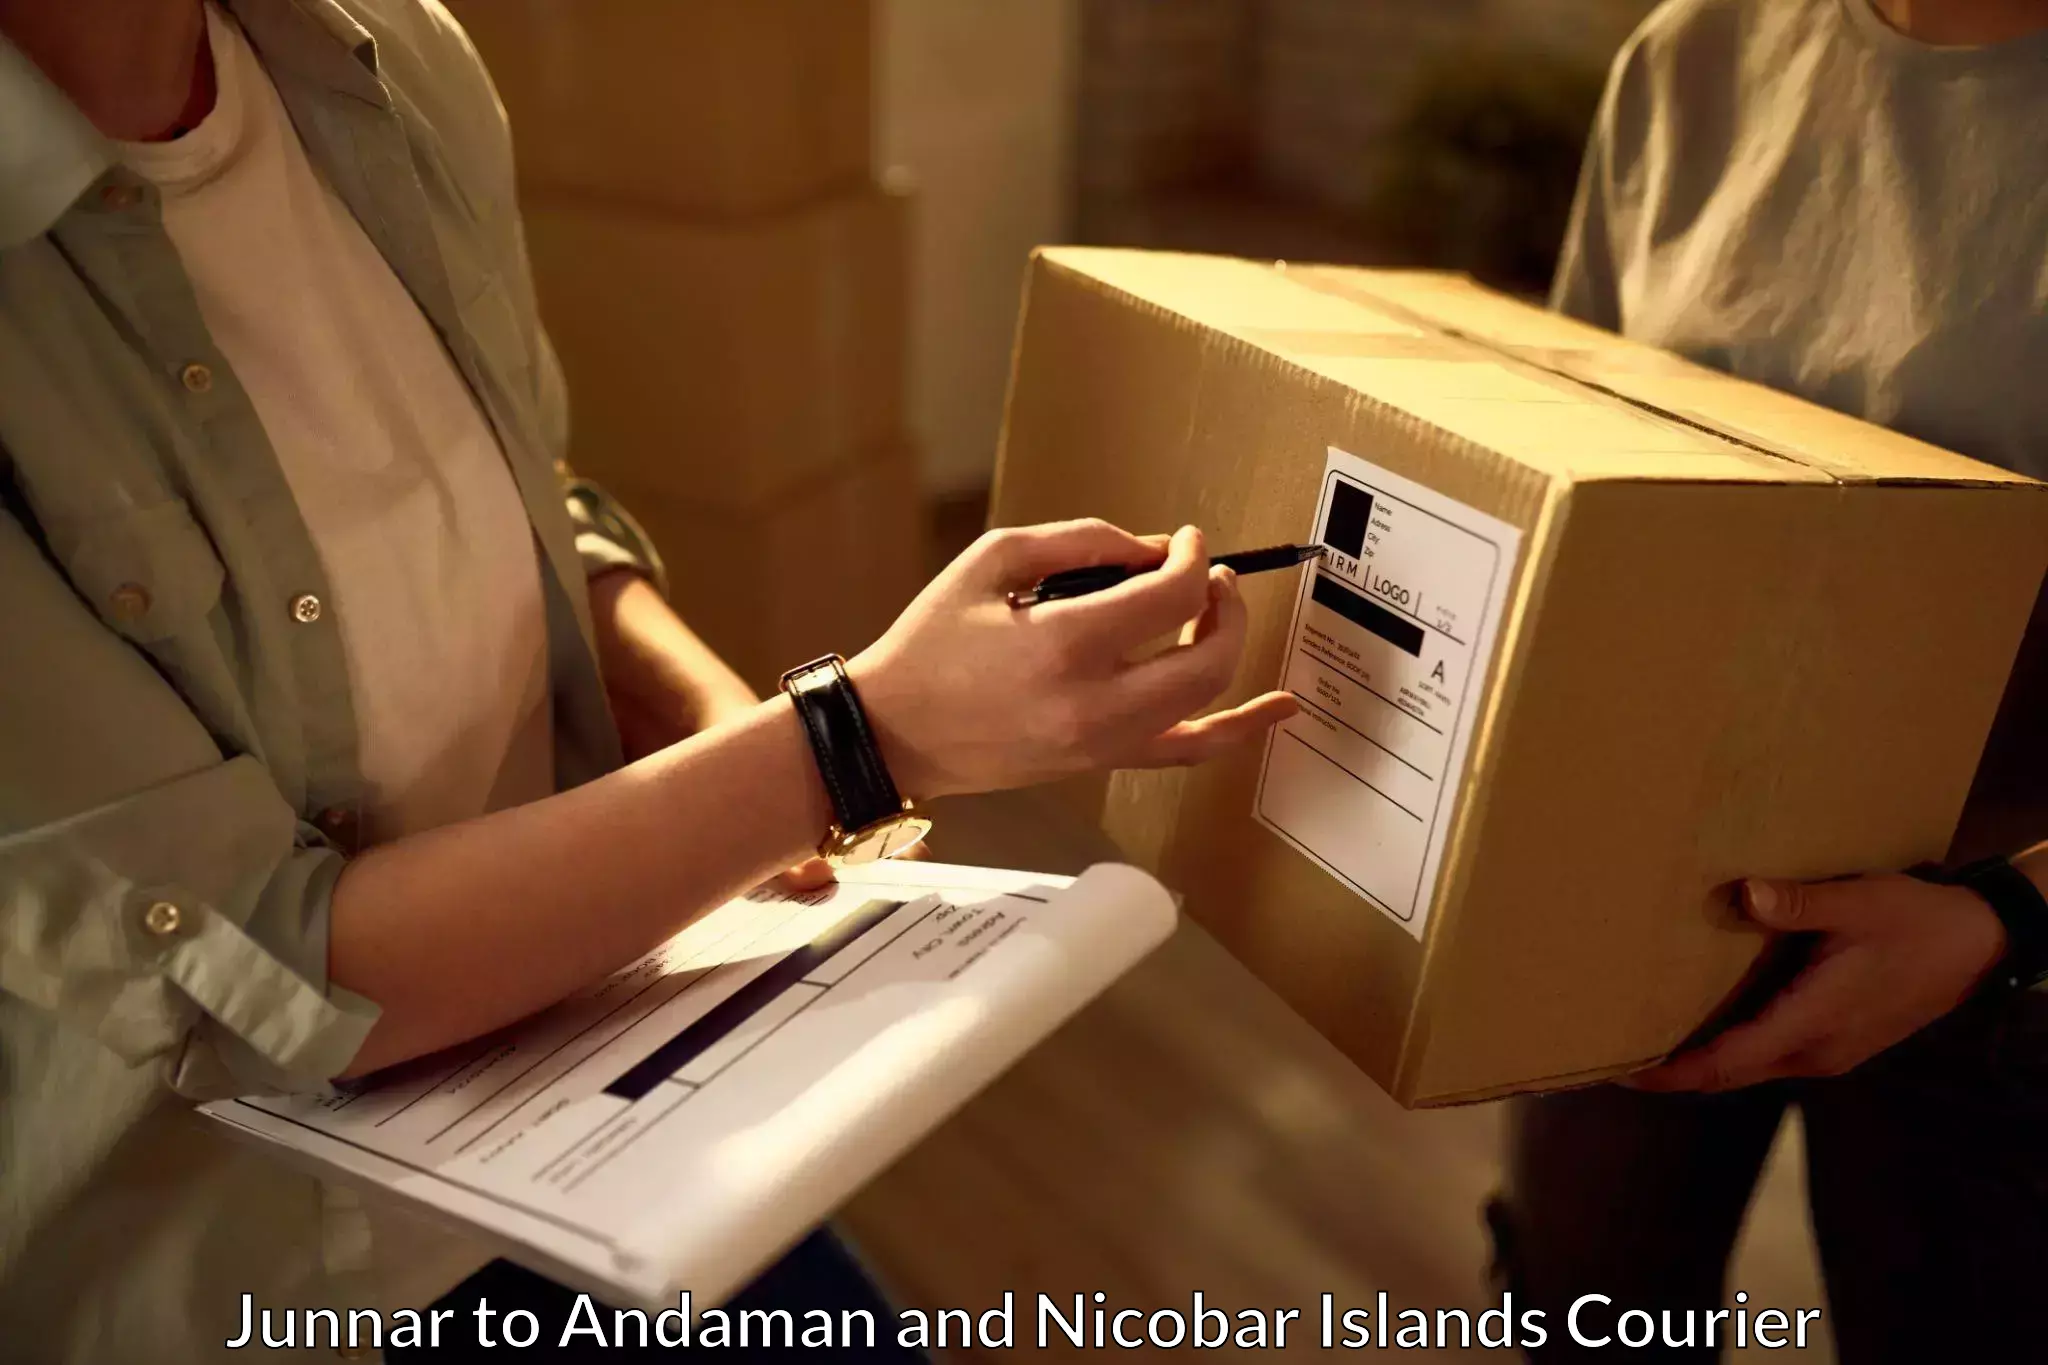 Local delivery service Junnar to Andaman and Nicobar Islands